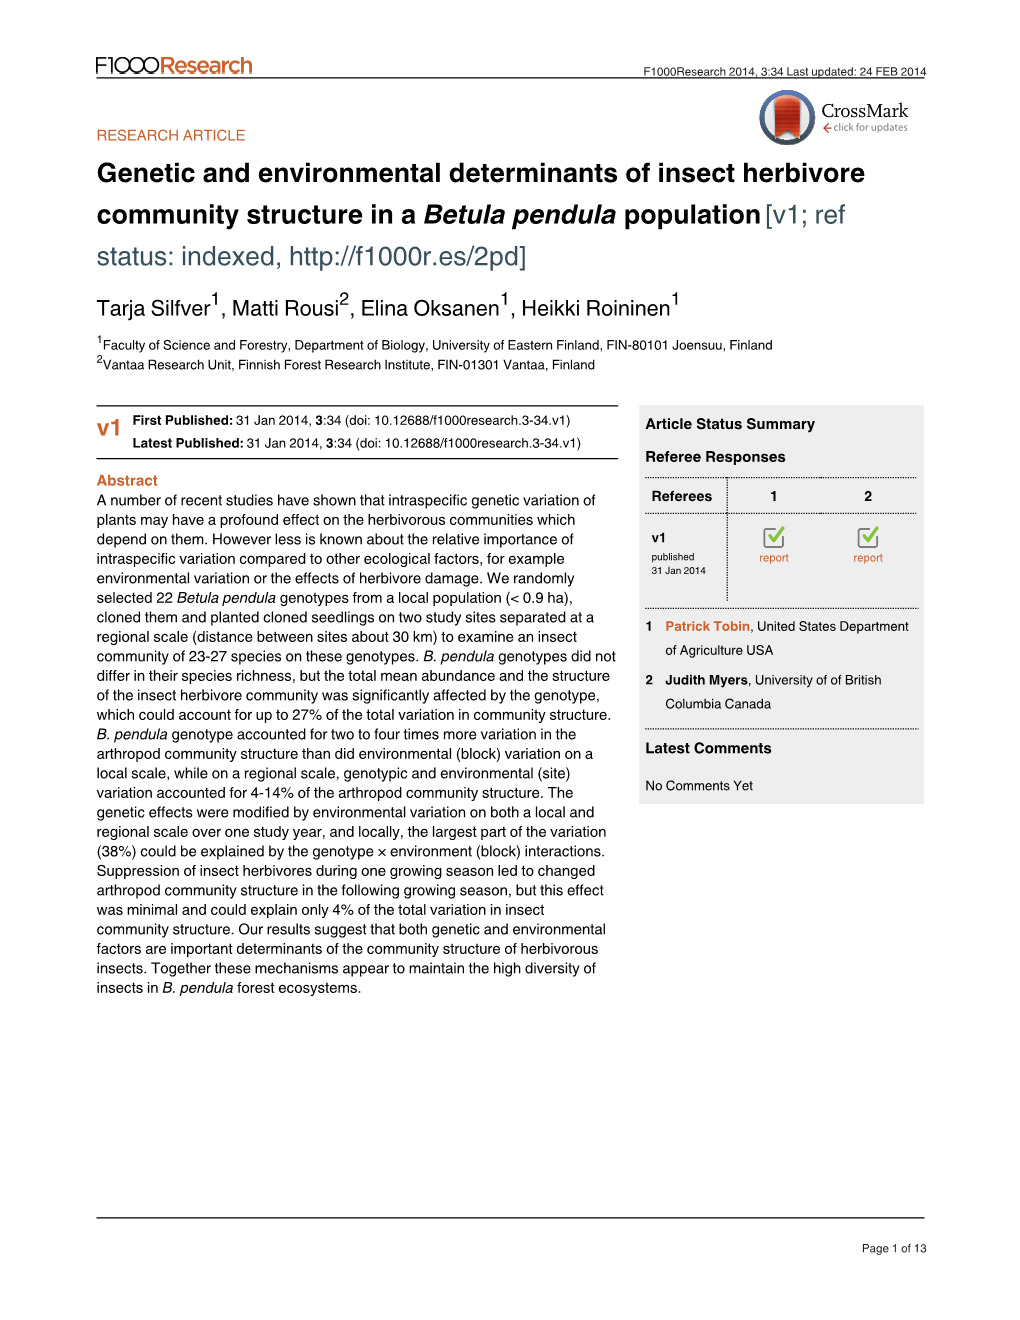 Genetic and Environmental Determinants of Insect Herbivore Community Structure in a Population Betula Pendula